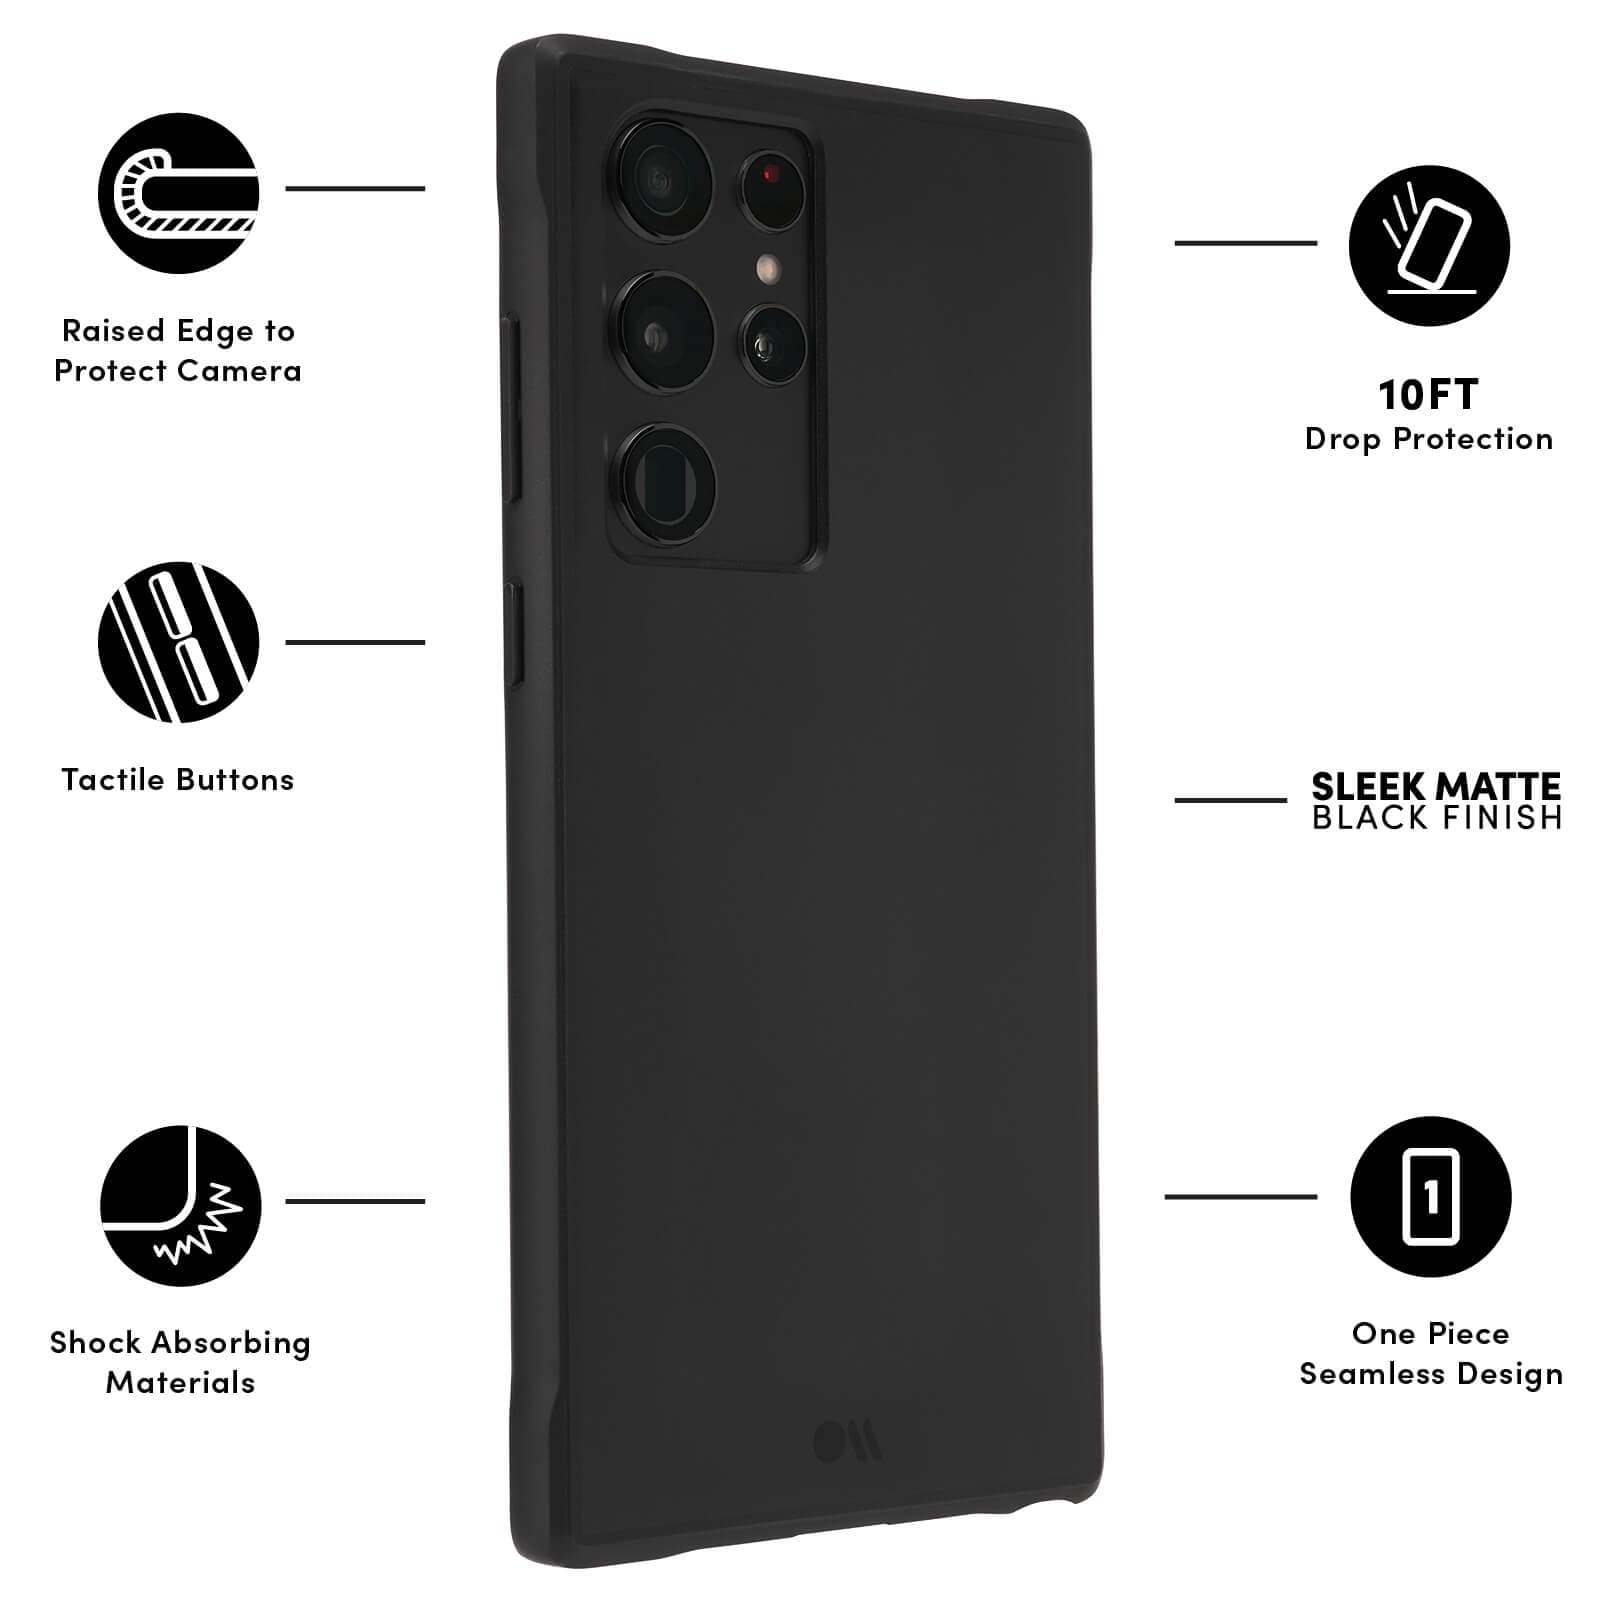 FEATURES: RAISED EDGE TO PROTECT CAMERA, TACTILE BUTTONS, SHOCK ABSORBING MATERIALS, 10FT DROP PROTECTION, SLEEK MATTE FINISH, ONE PIECE SEAMLESS DESIGN. COLOR::BLACK